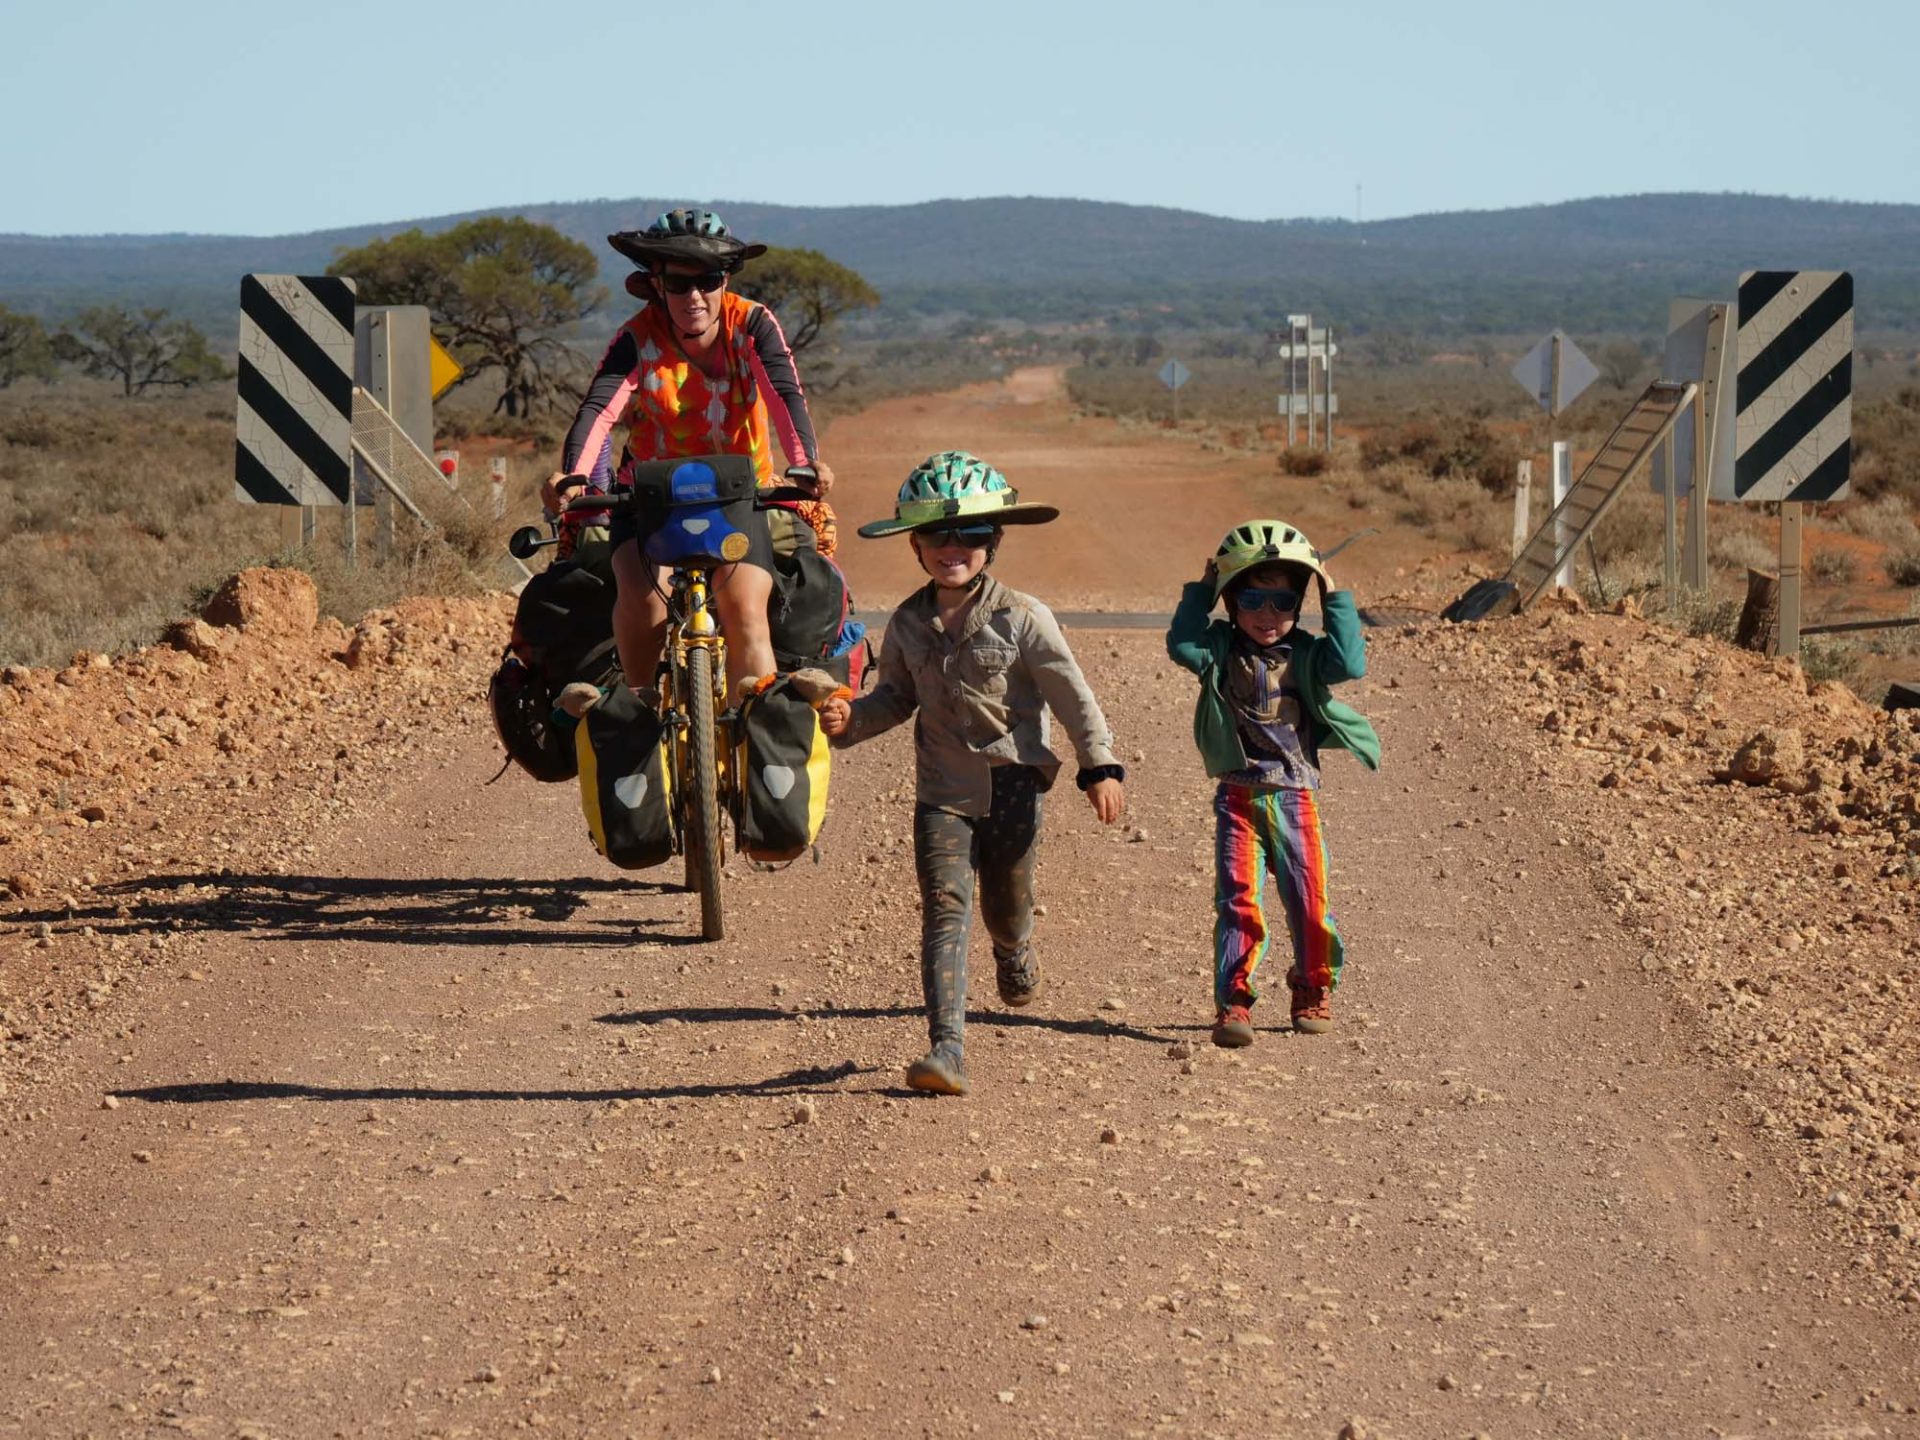 Nicola rides along a dirt road toward the photographer, both children running, smiling, alongside her. 